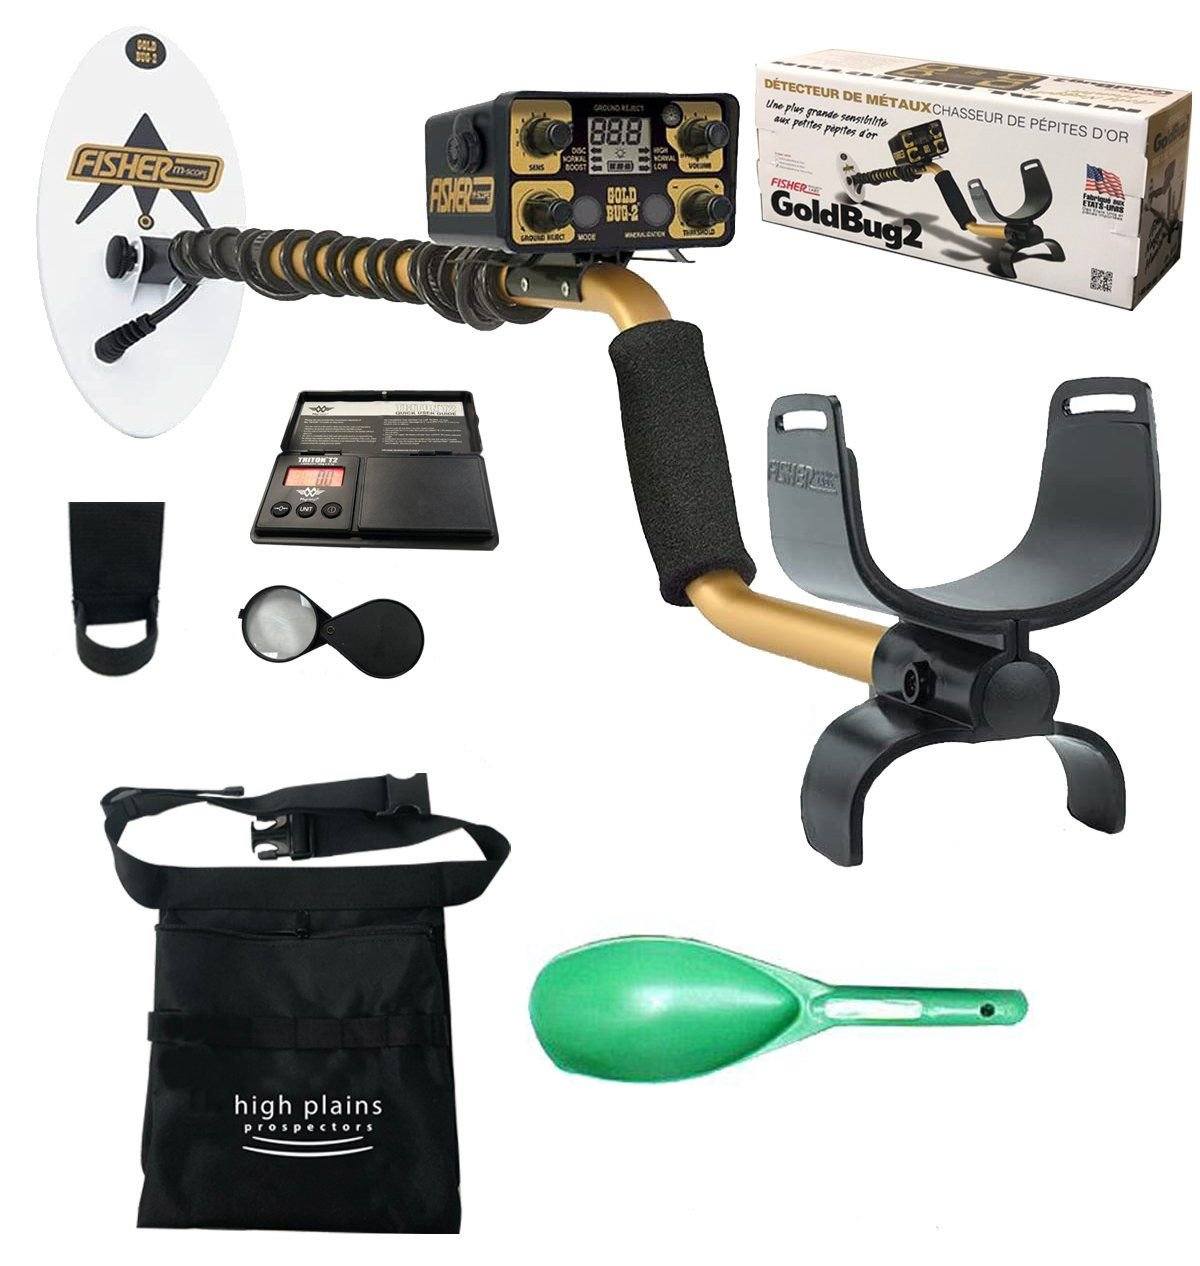 Fisher Gold Bug 2 Nugget Hunter Metal Detector 10" Coil Bundle with Scoop, Holster, 2" Loupe, T2 Scale and Large Finds Pouch